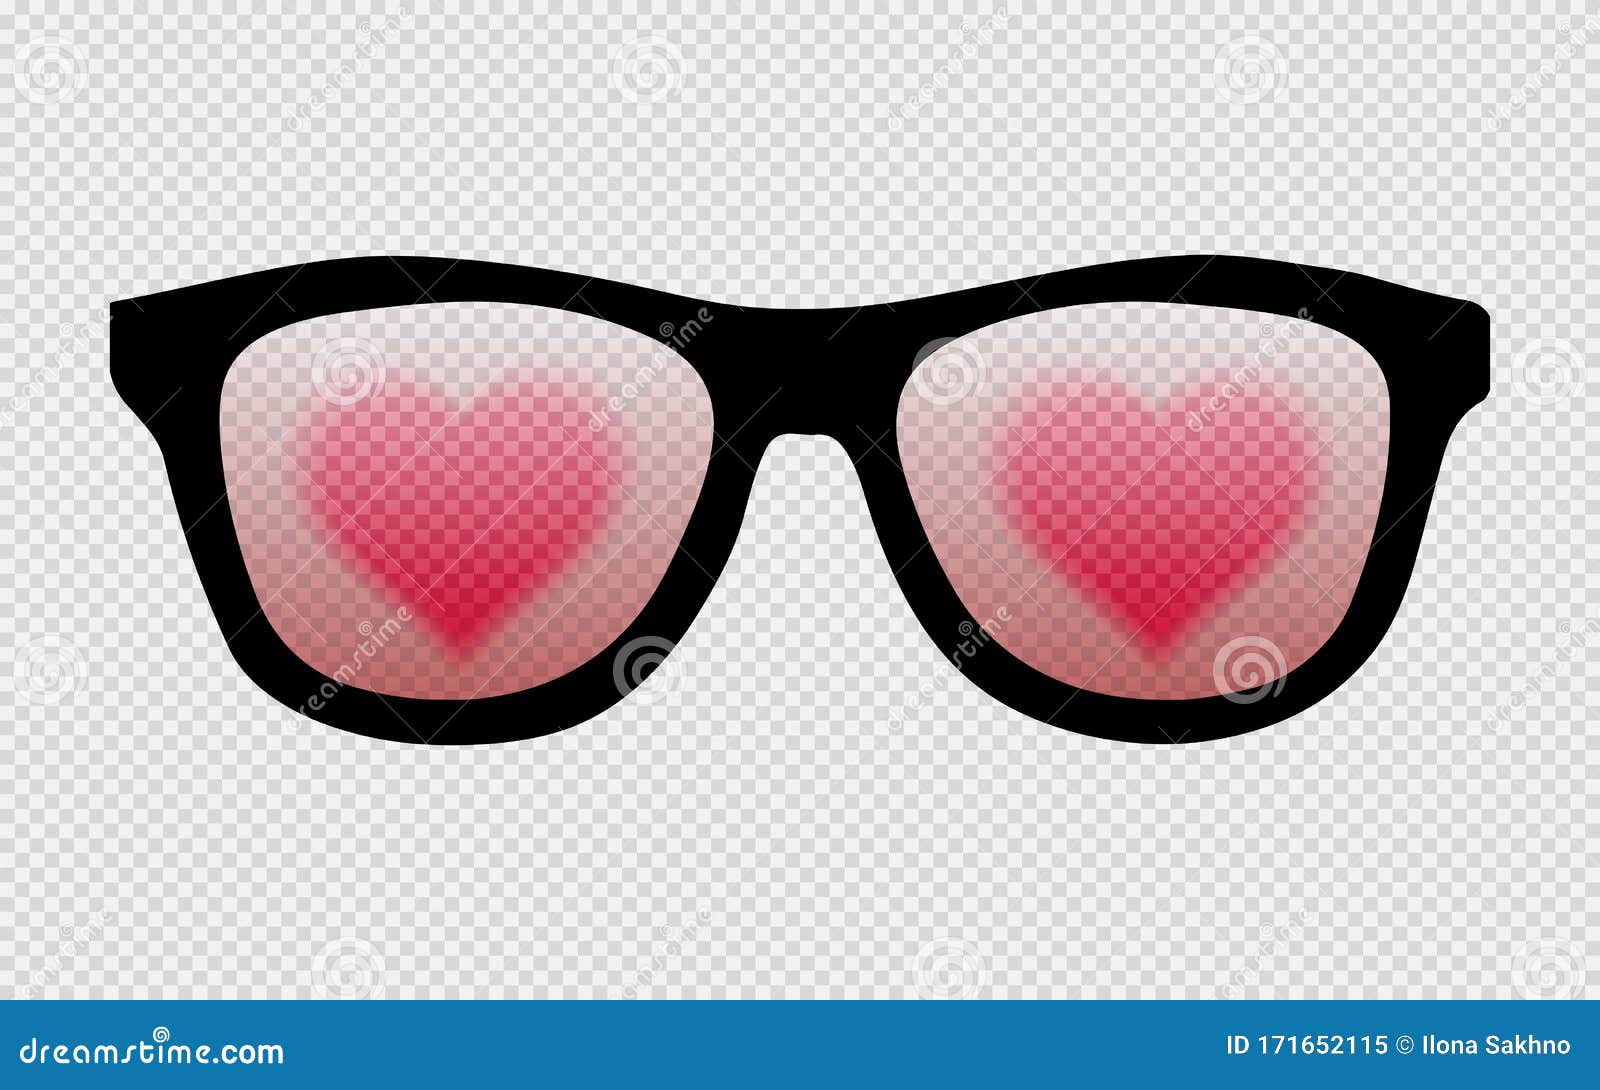 Glasses with Reflection of the Heart. St. Valentine S Day. Glasses in Pink  on a Transparent Background Stock Vector - Illustration of love, eyeglasses:  171652115